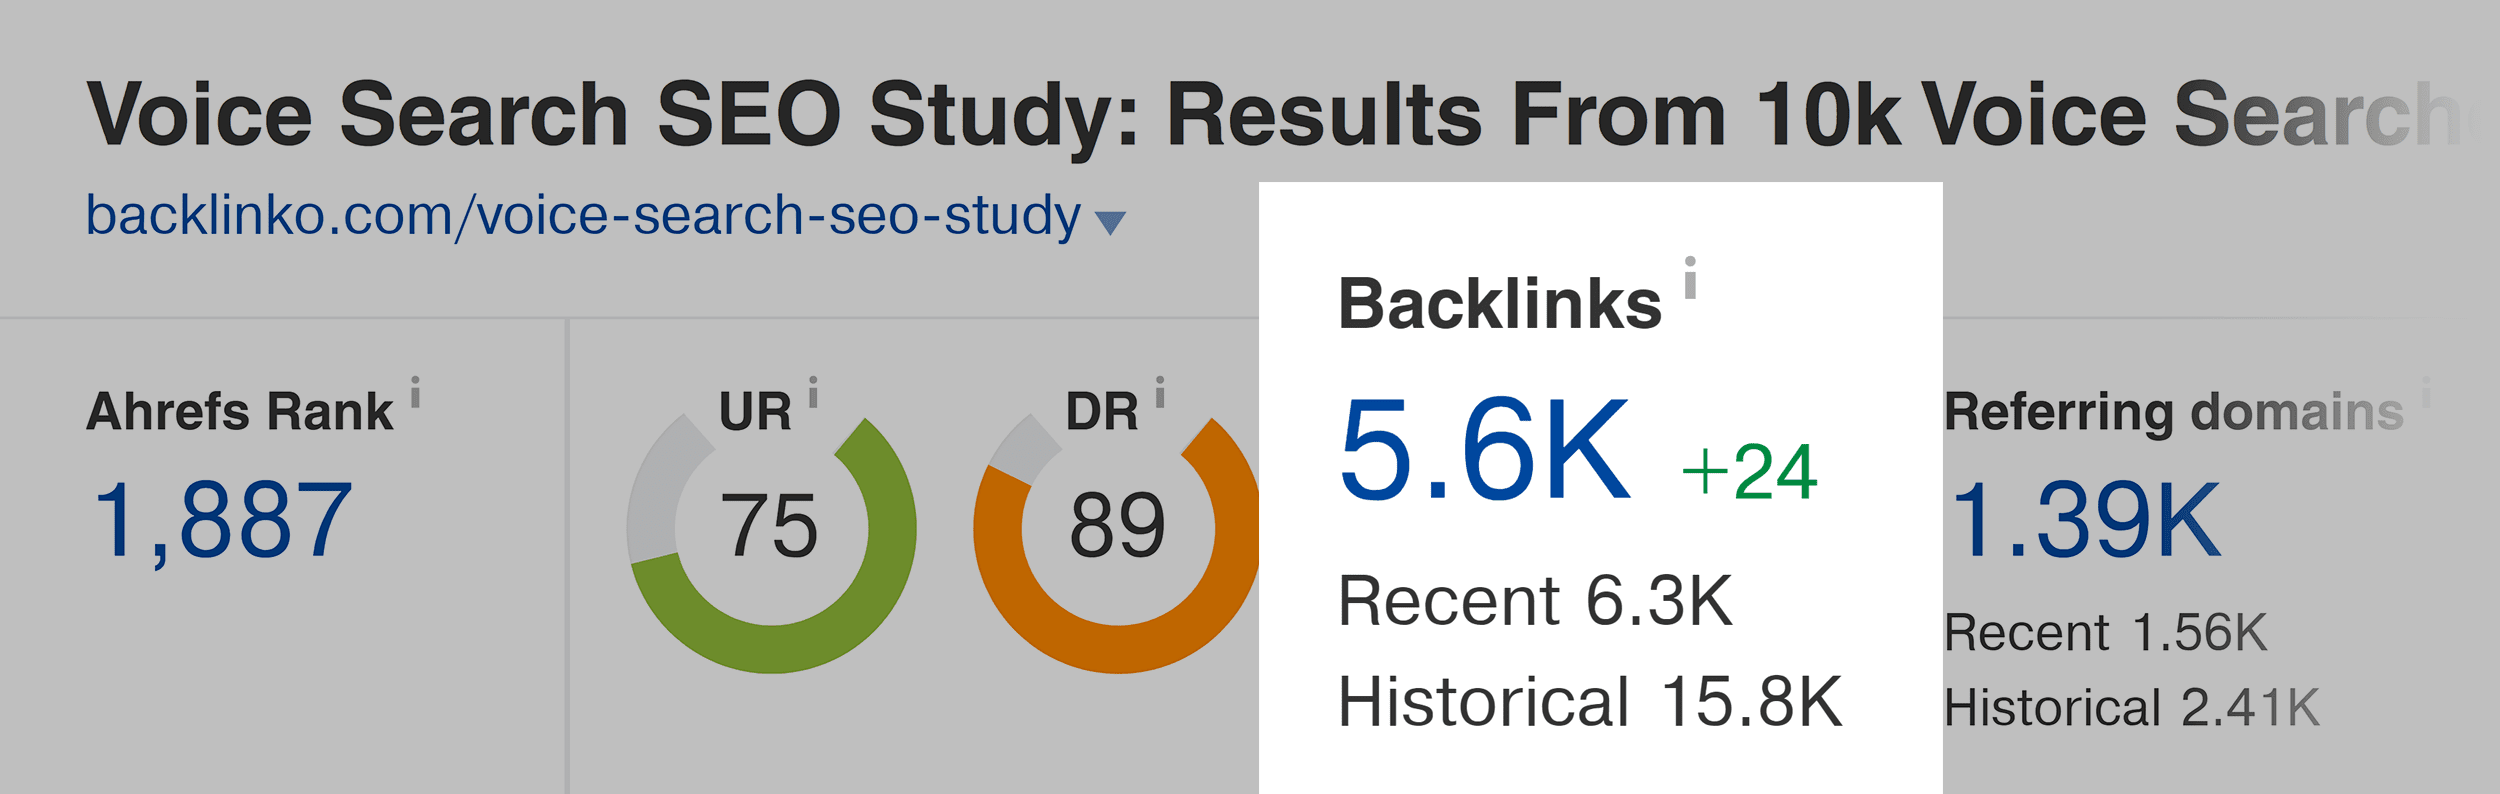 Voice search SEO study – Backlinks